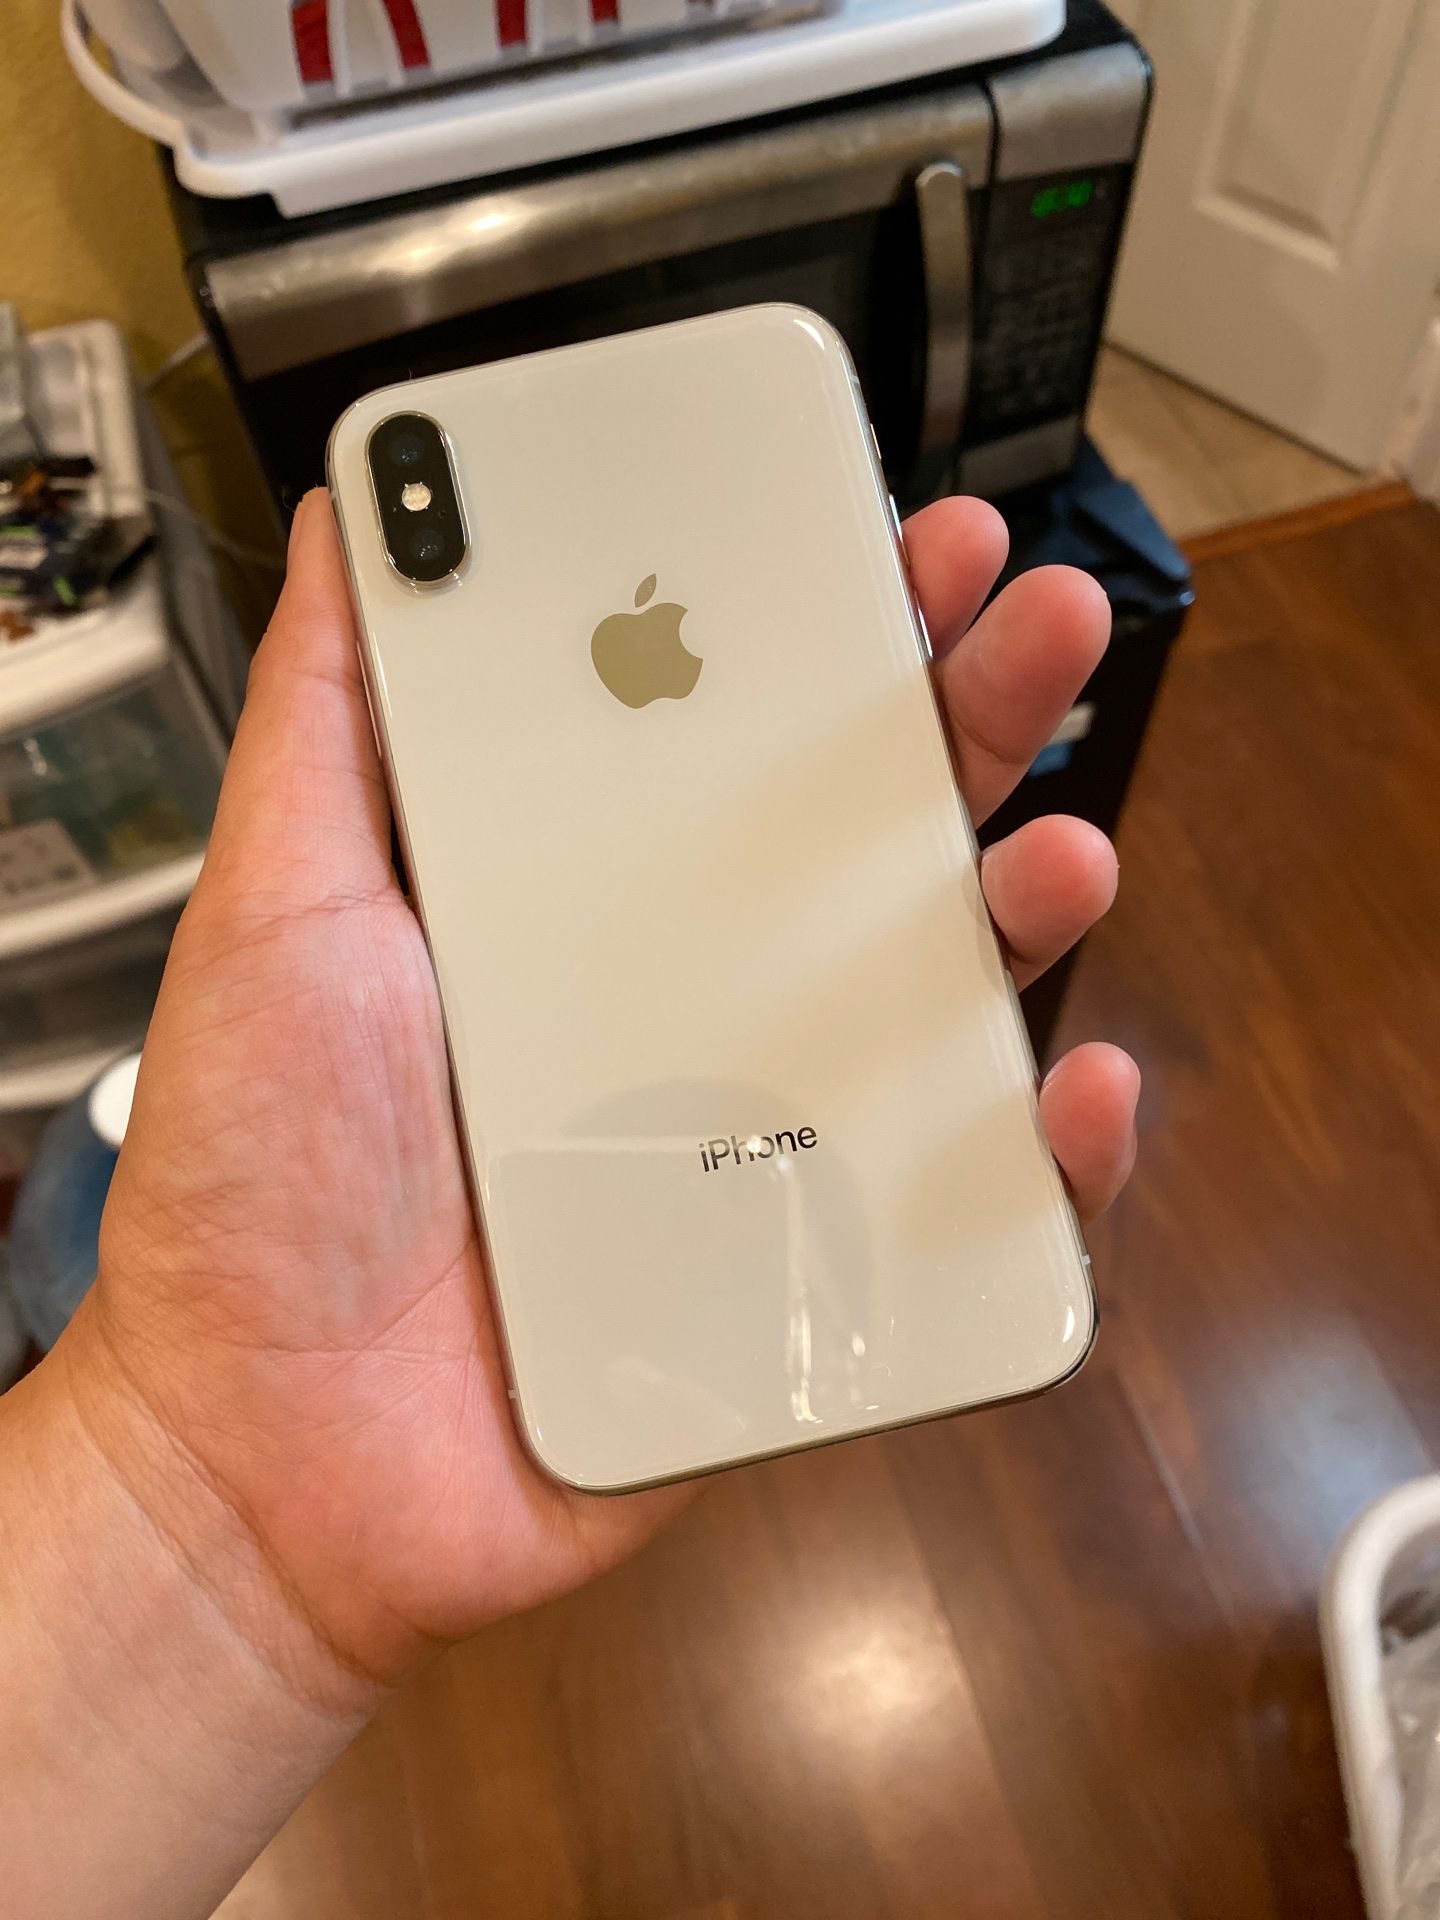 Iphone X 256GB (for part) unlocked but dead, Just can’t turn on. I bought a new iphone pro max so let it go as part.